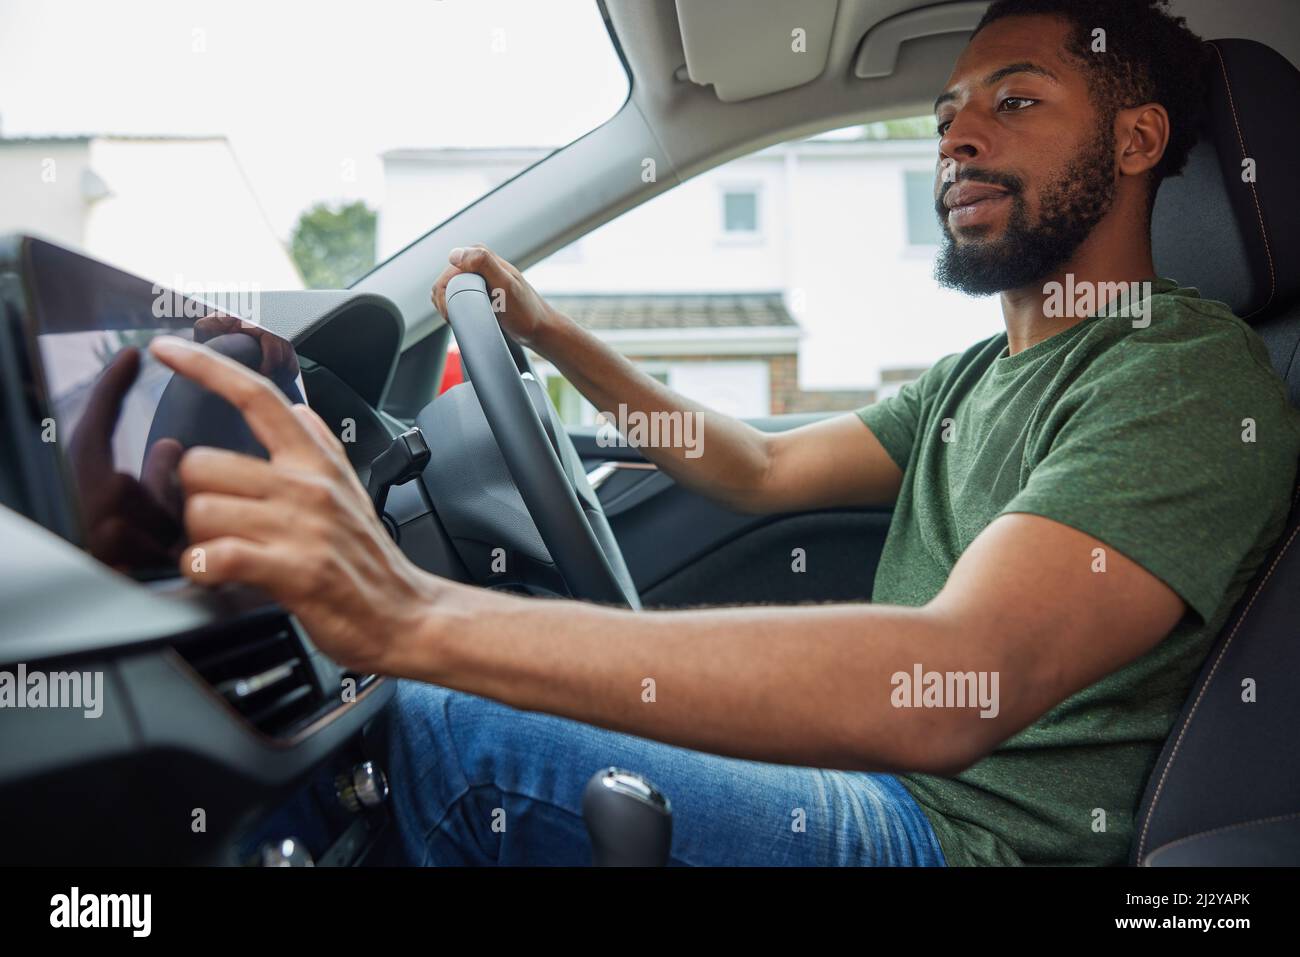 Man Using Touchscreen Whilst Driving Car Stock Photo